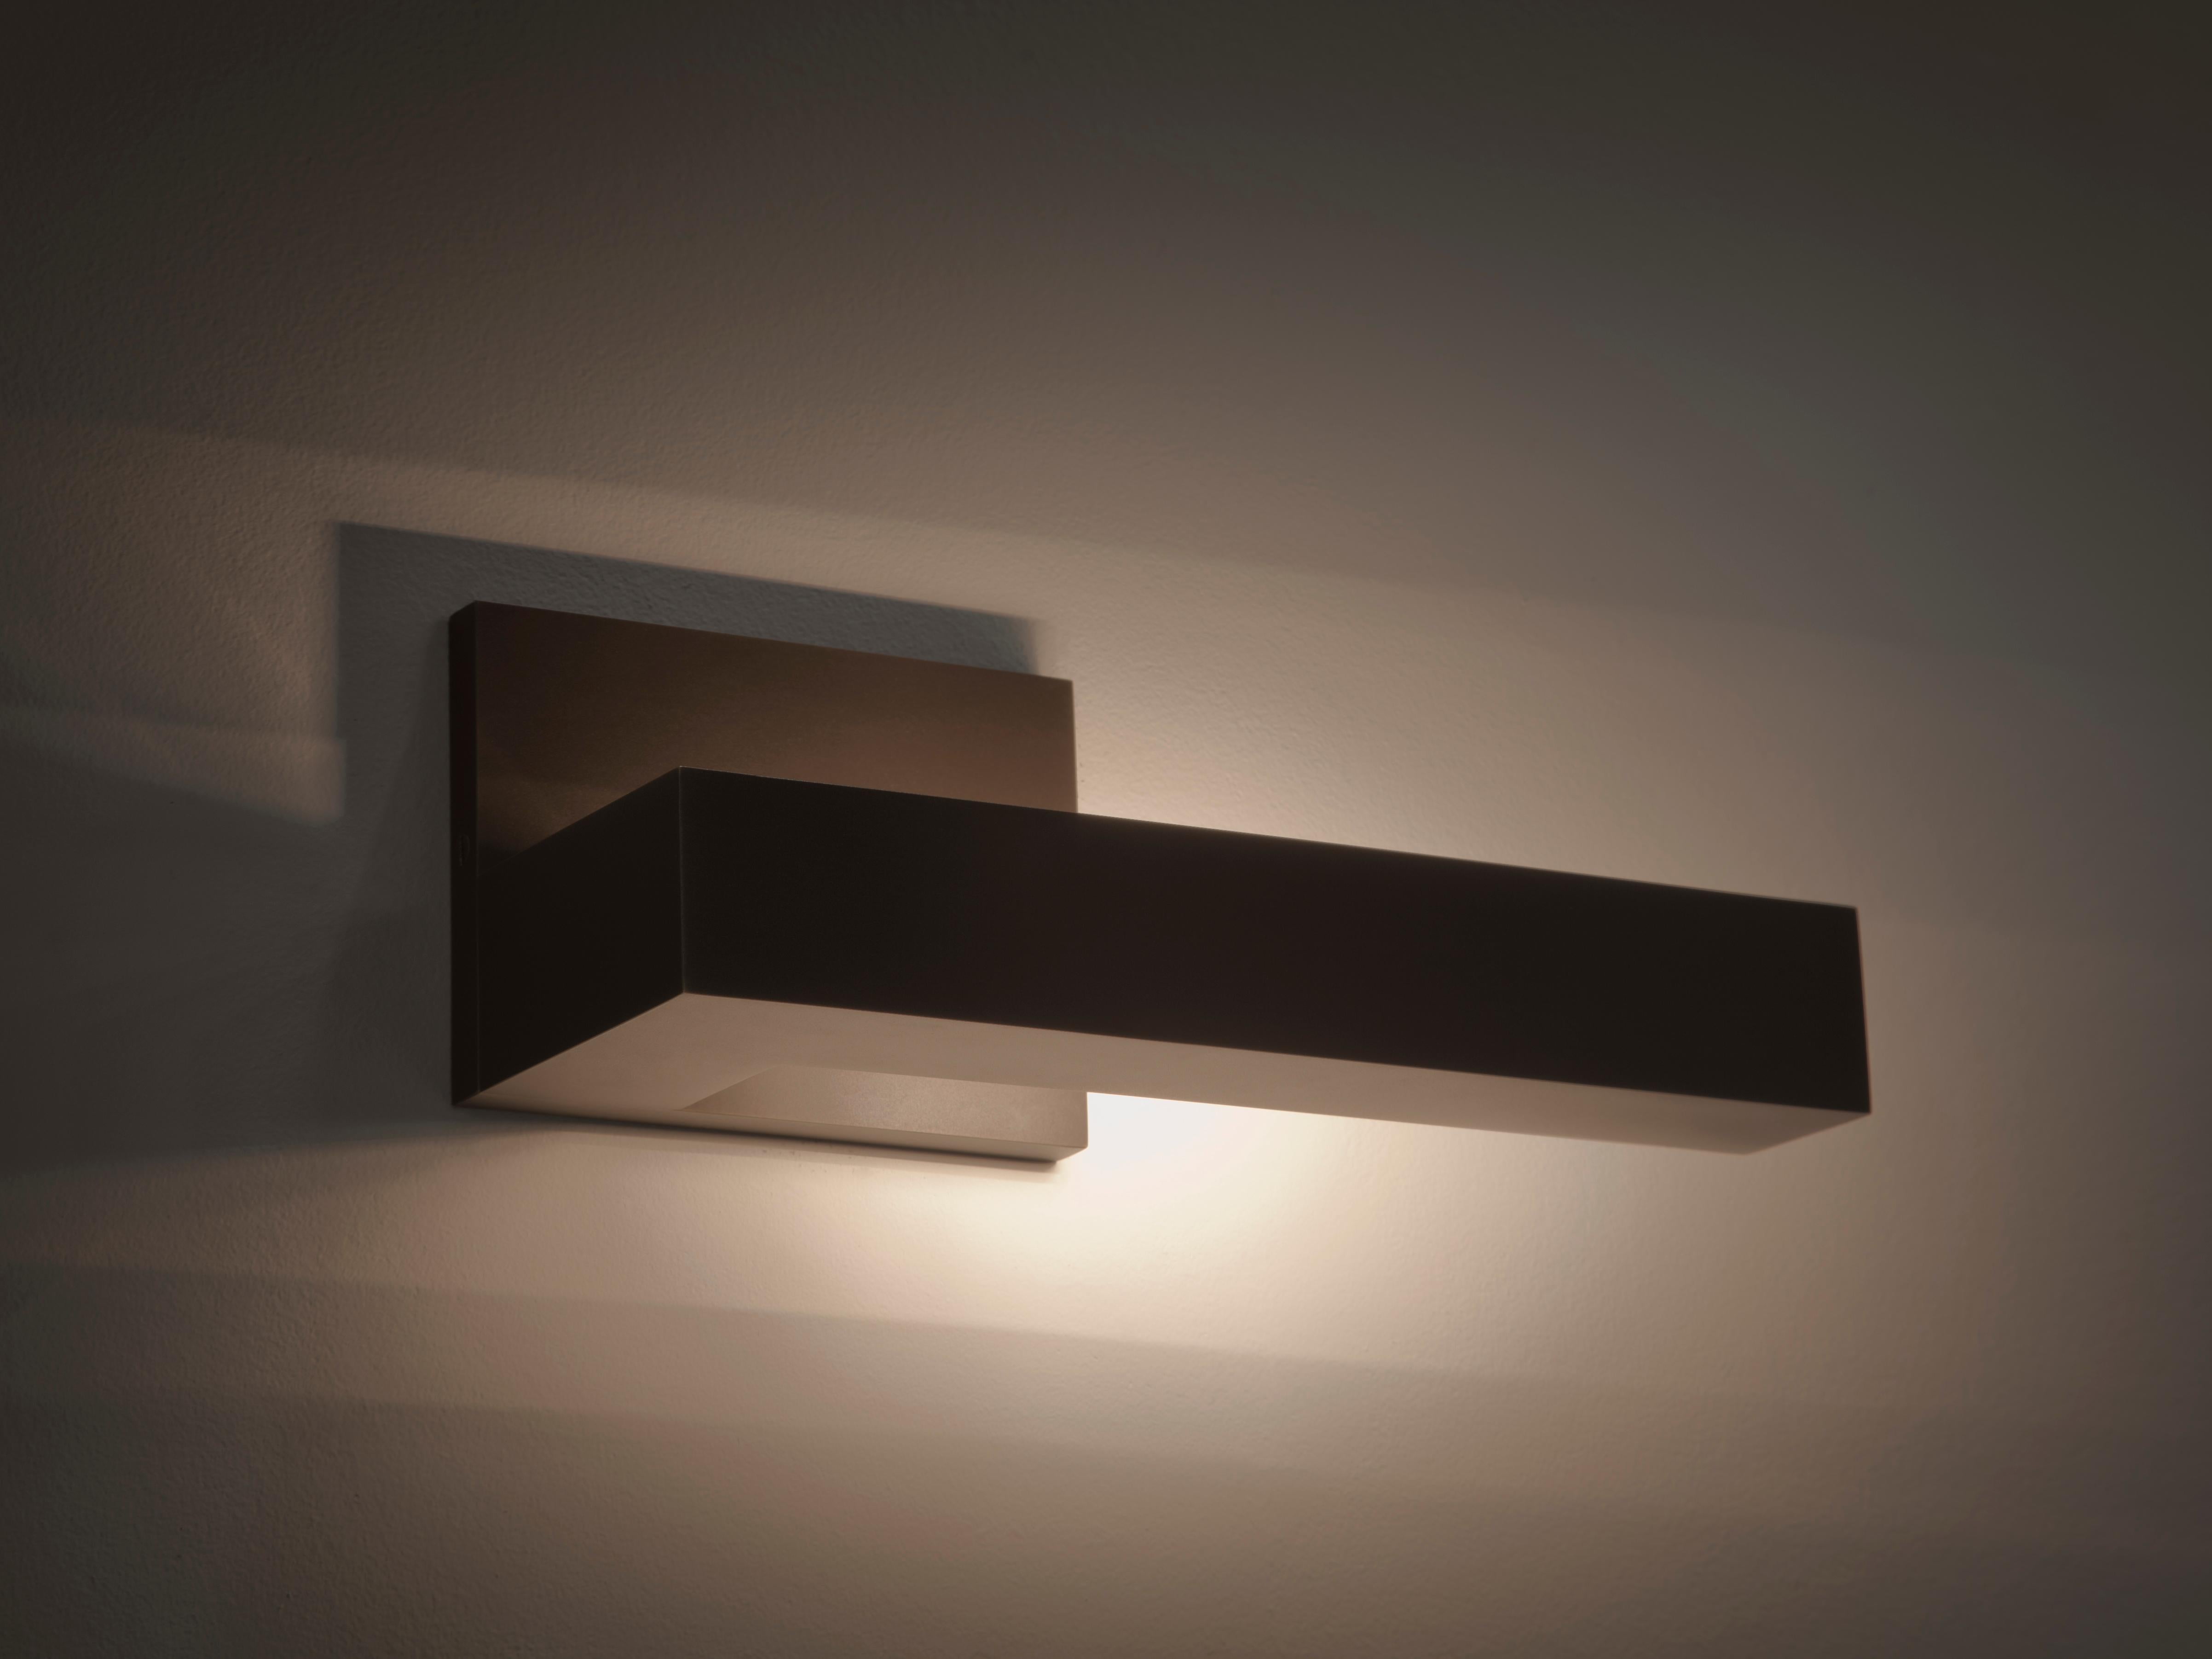 HOLLY HUNT right facing Bar wall sconce in medium bronze patinated finish. Expressing minimal modernism in a sconce that focuses on functionality, material and proportions. Creating a discrete yet impactful presence in any space.



Additional